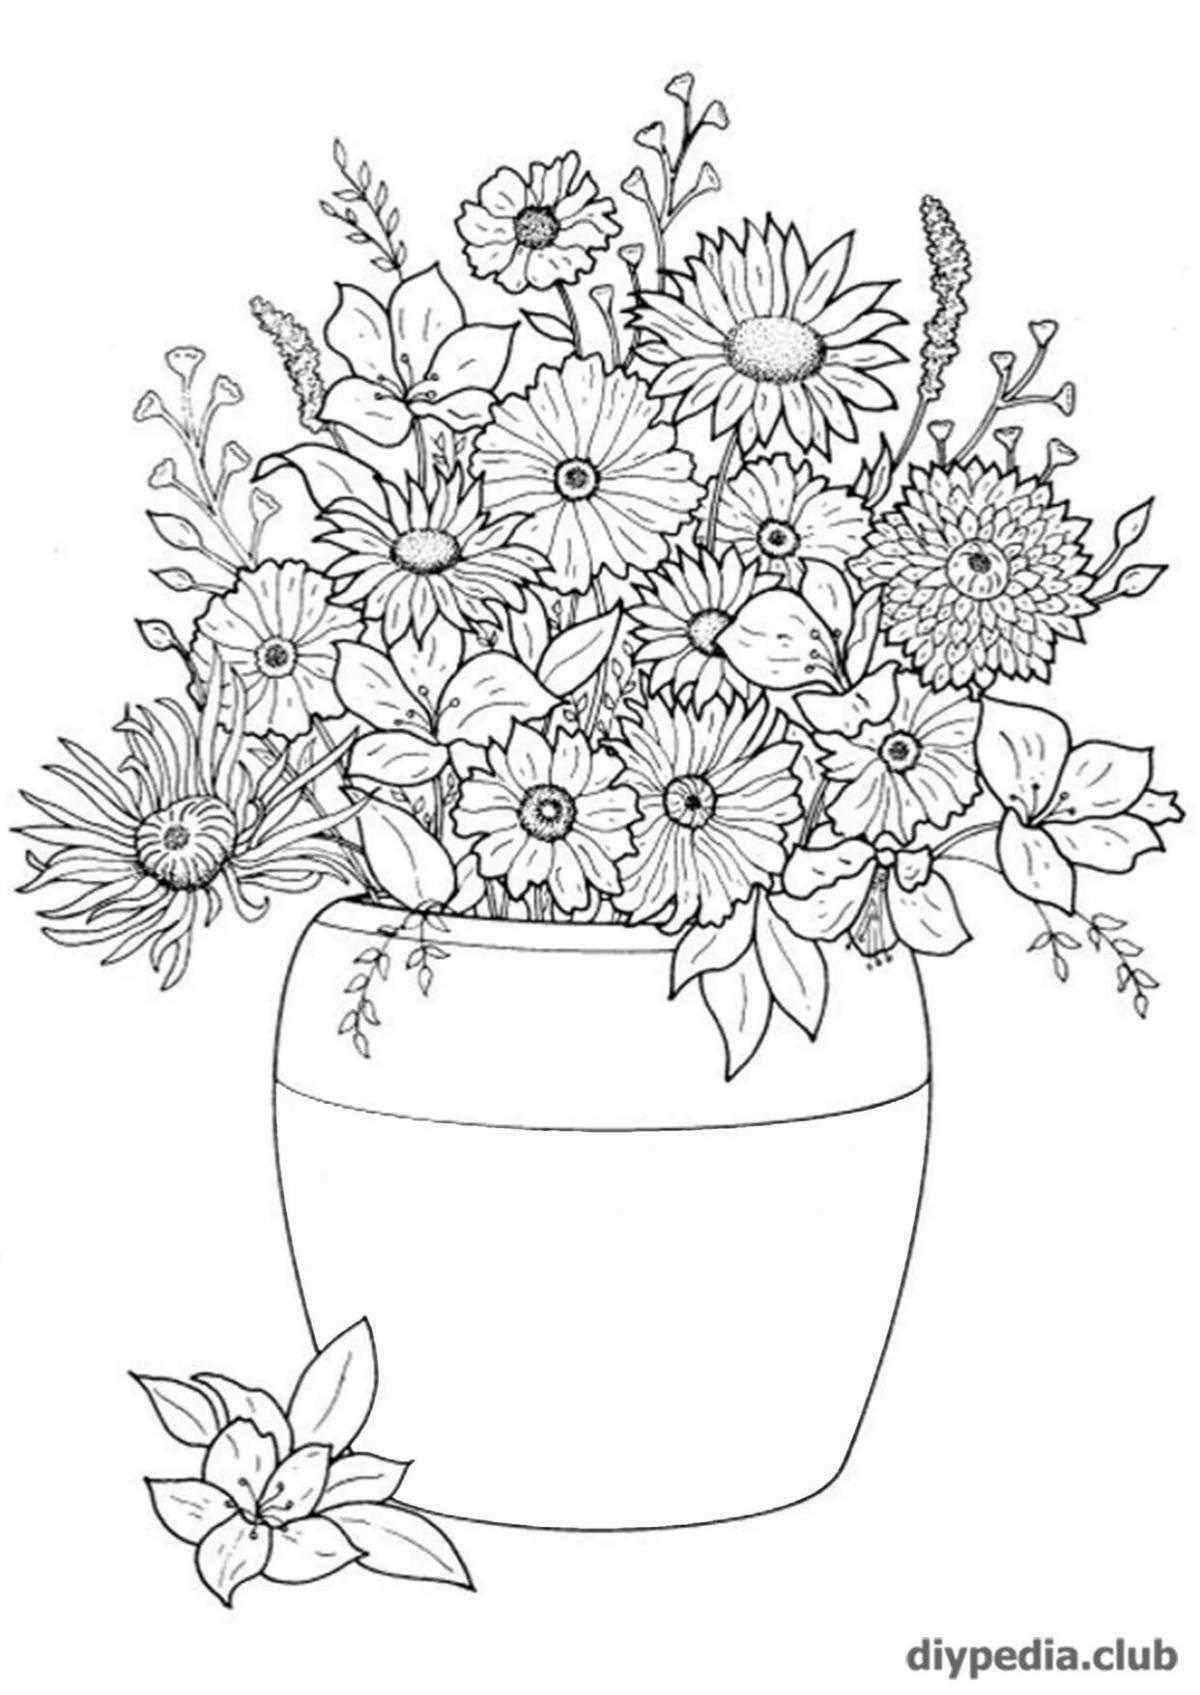 Coloring page blissful bouquet of flowers in a vase